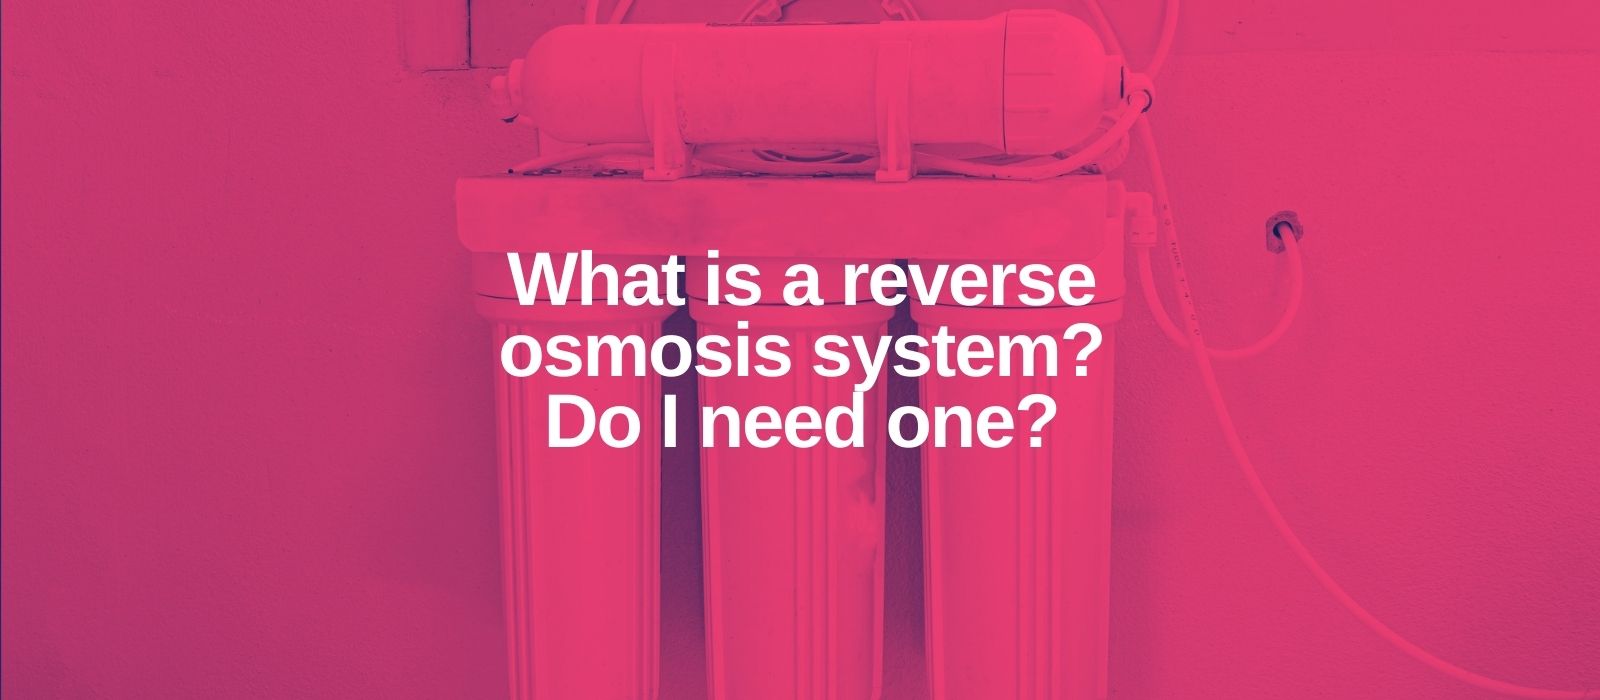 What is a reverse osmosis system and do I need one?